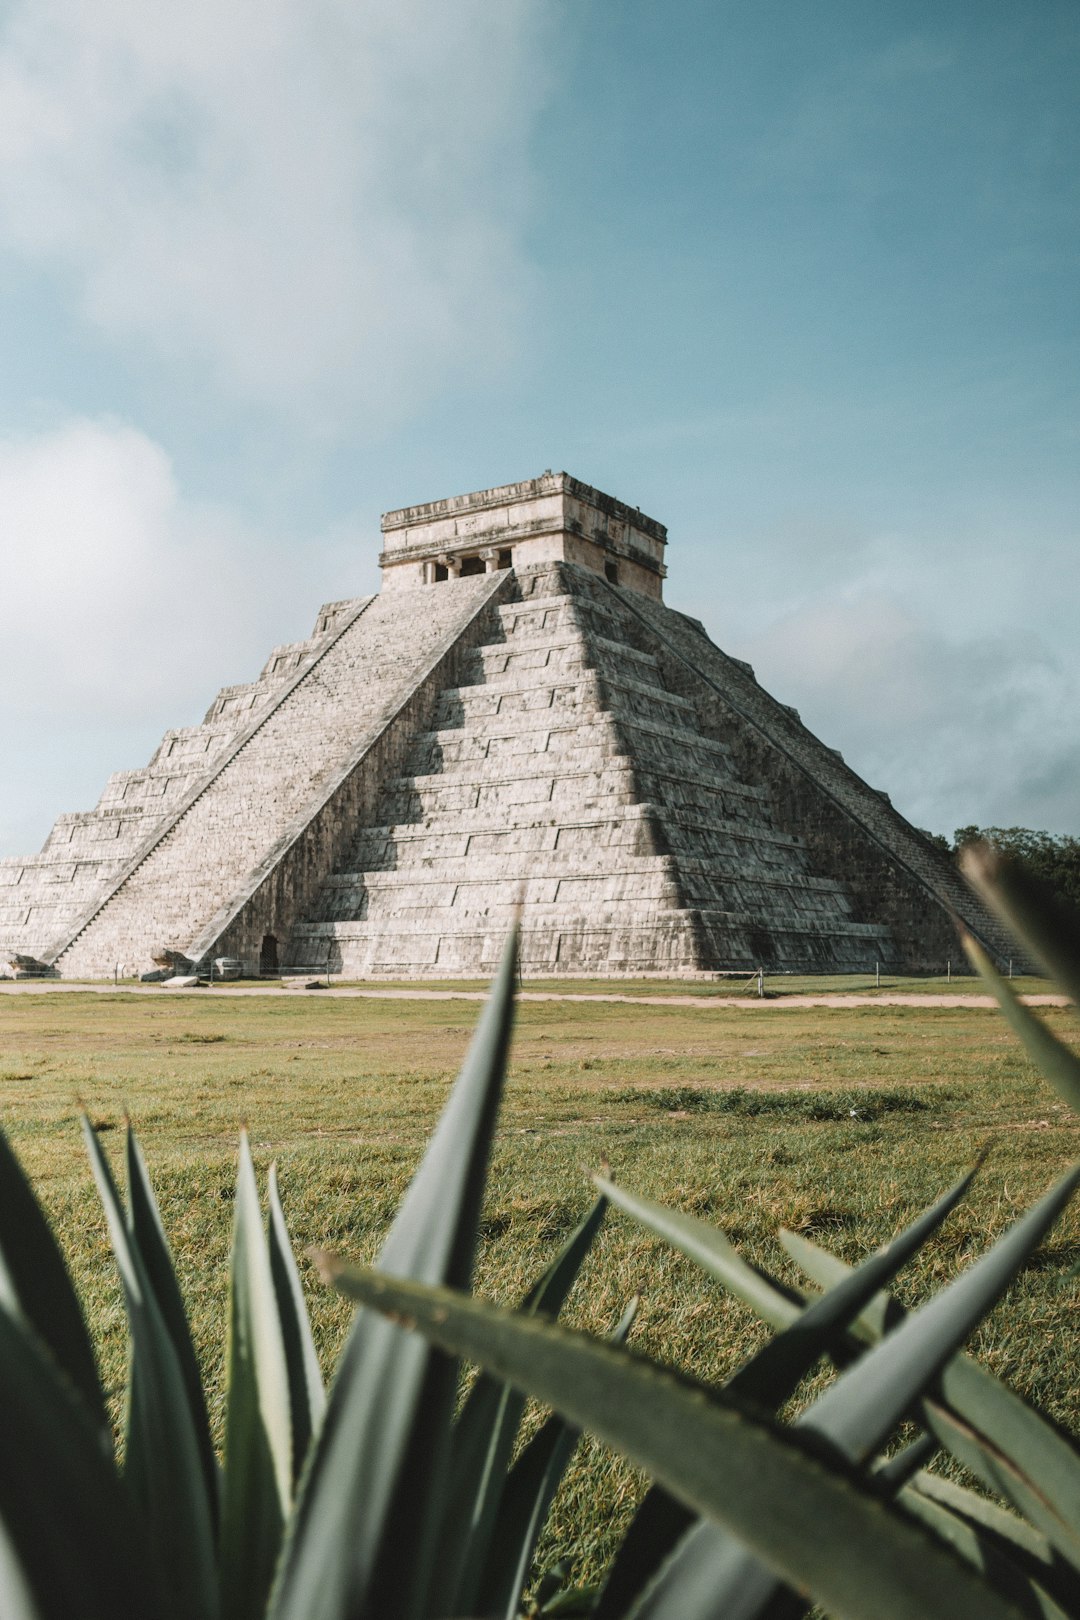 Travel Tips and Stories of Pyramid of the Magician in Mexico